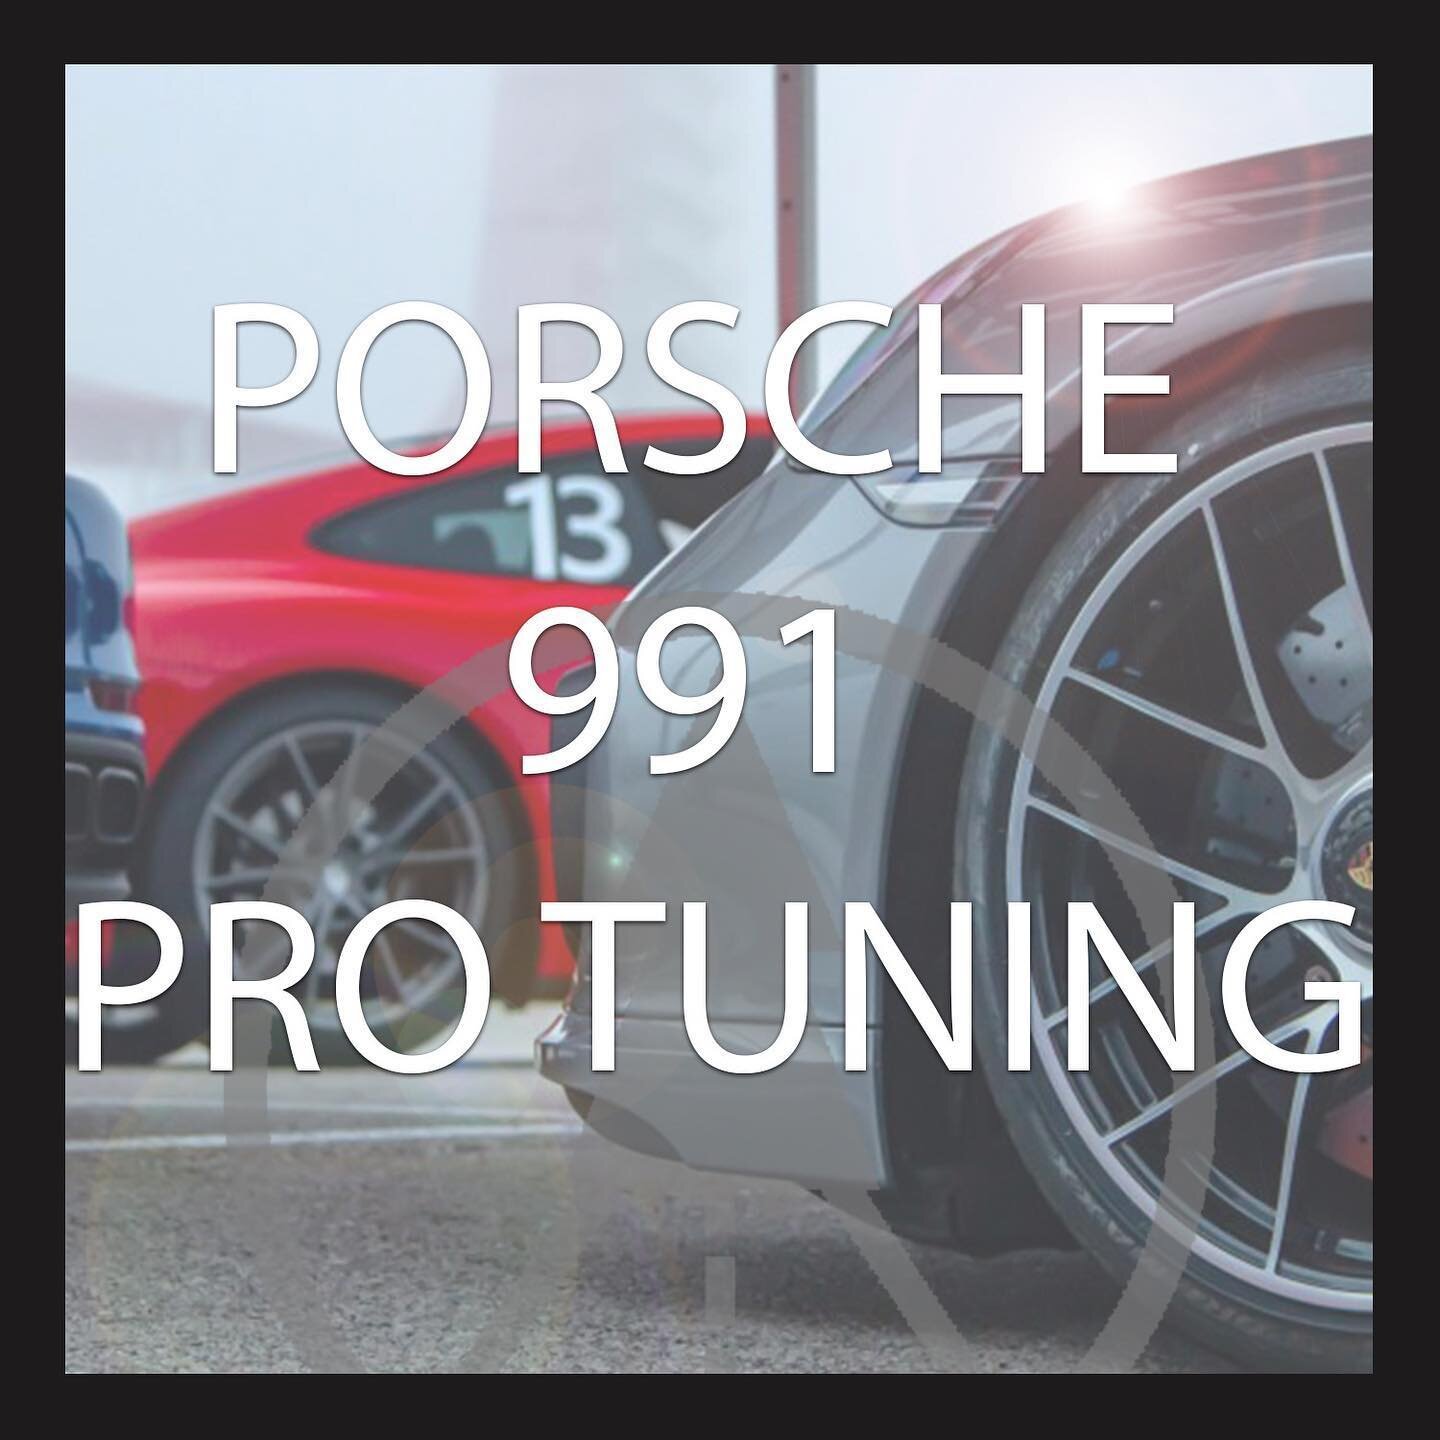 -&gt;-&gt;-&gt; SWIPE FOR DYNO -&gt;-&gt;-&gt; Link in bio. We have been working on our 991 Porsche program and have had great results! 📈 With on the fly map switching, different octane and hard parts support, we can cover all your 991 tuning needs.